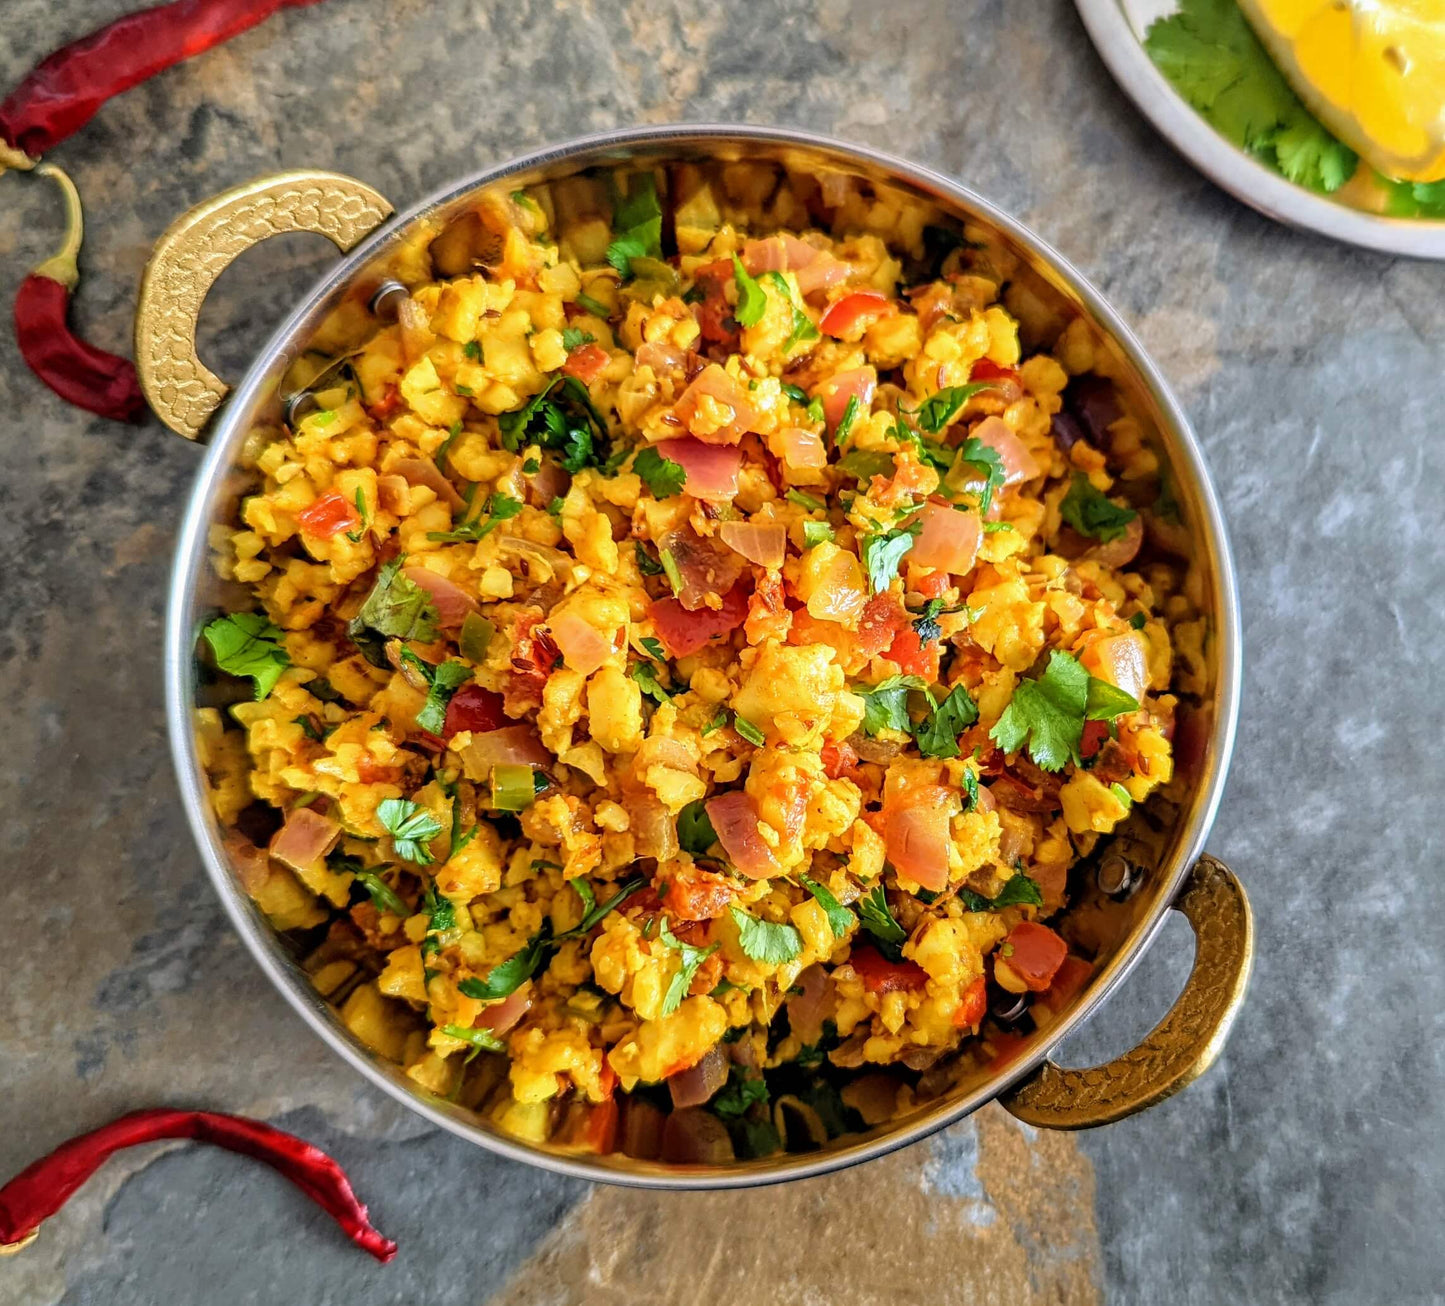 Paneer Bhurji - cheese cooked in herbs and Spice